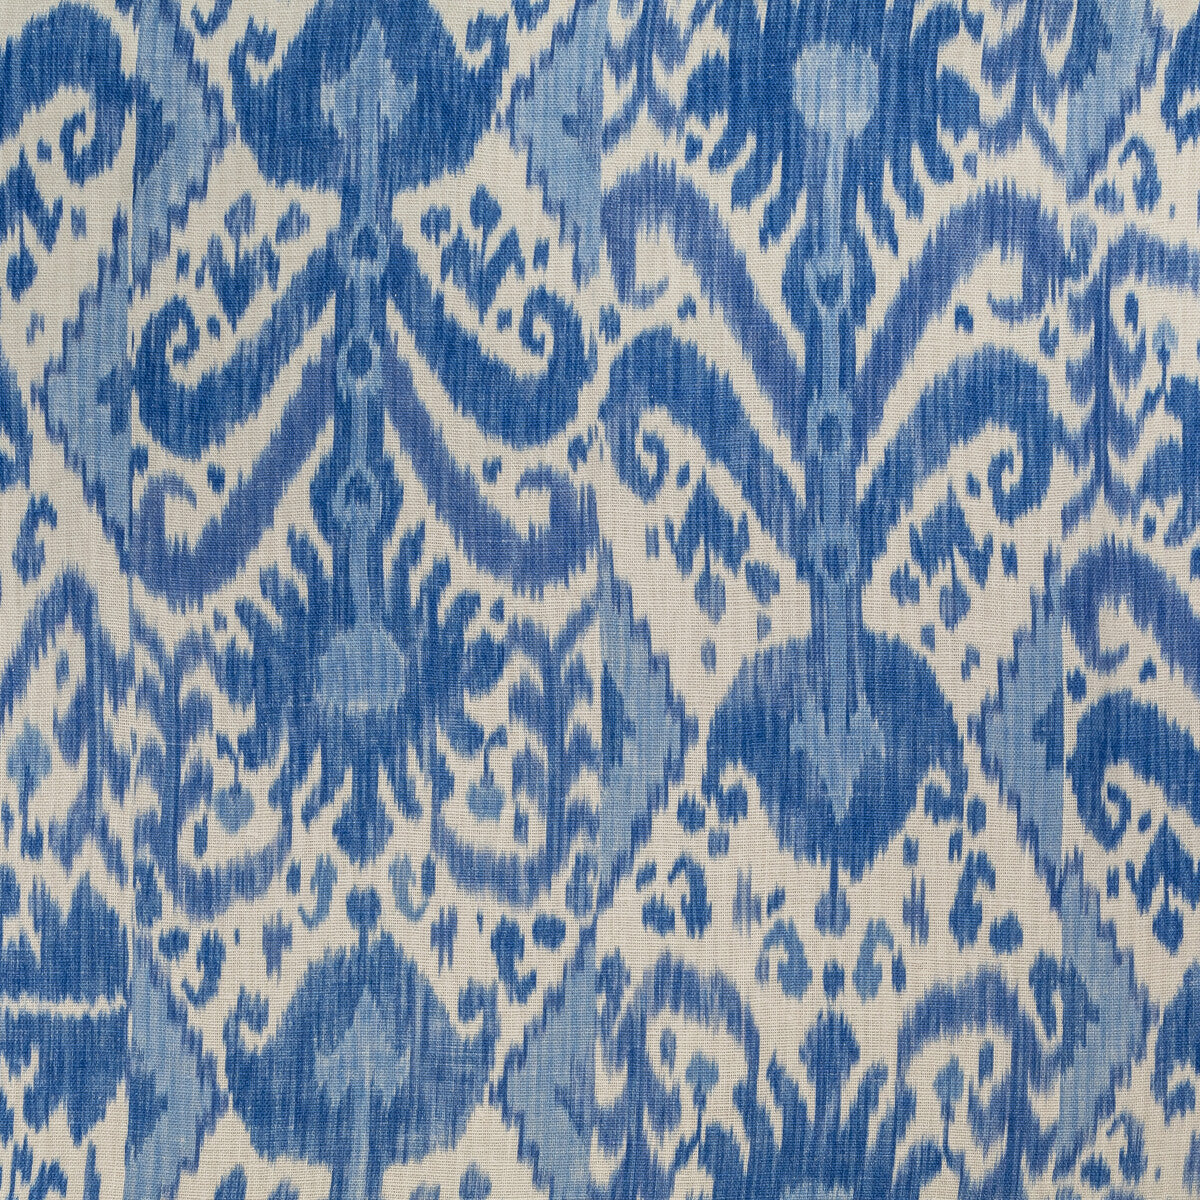 Kamara fabric in blue color - pattern BFC-3688.155.0 - by Lee Jofa in the Blithfield collection